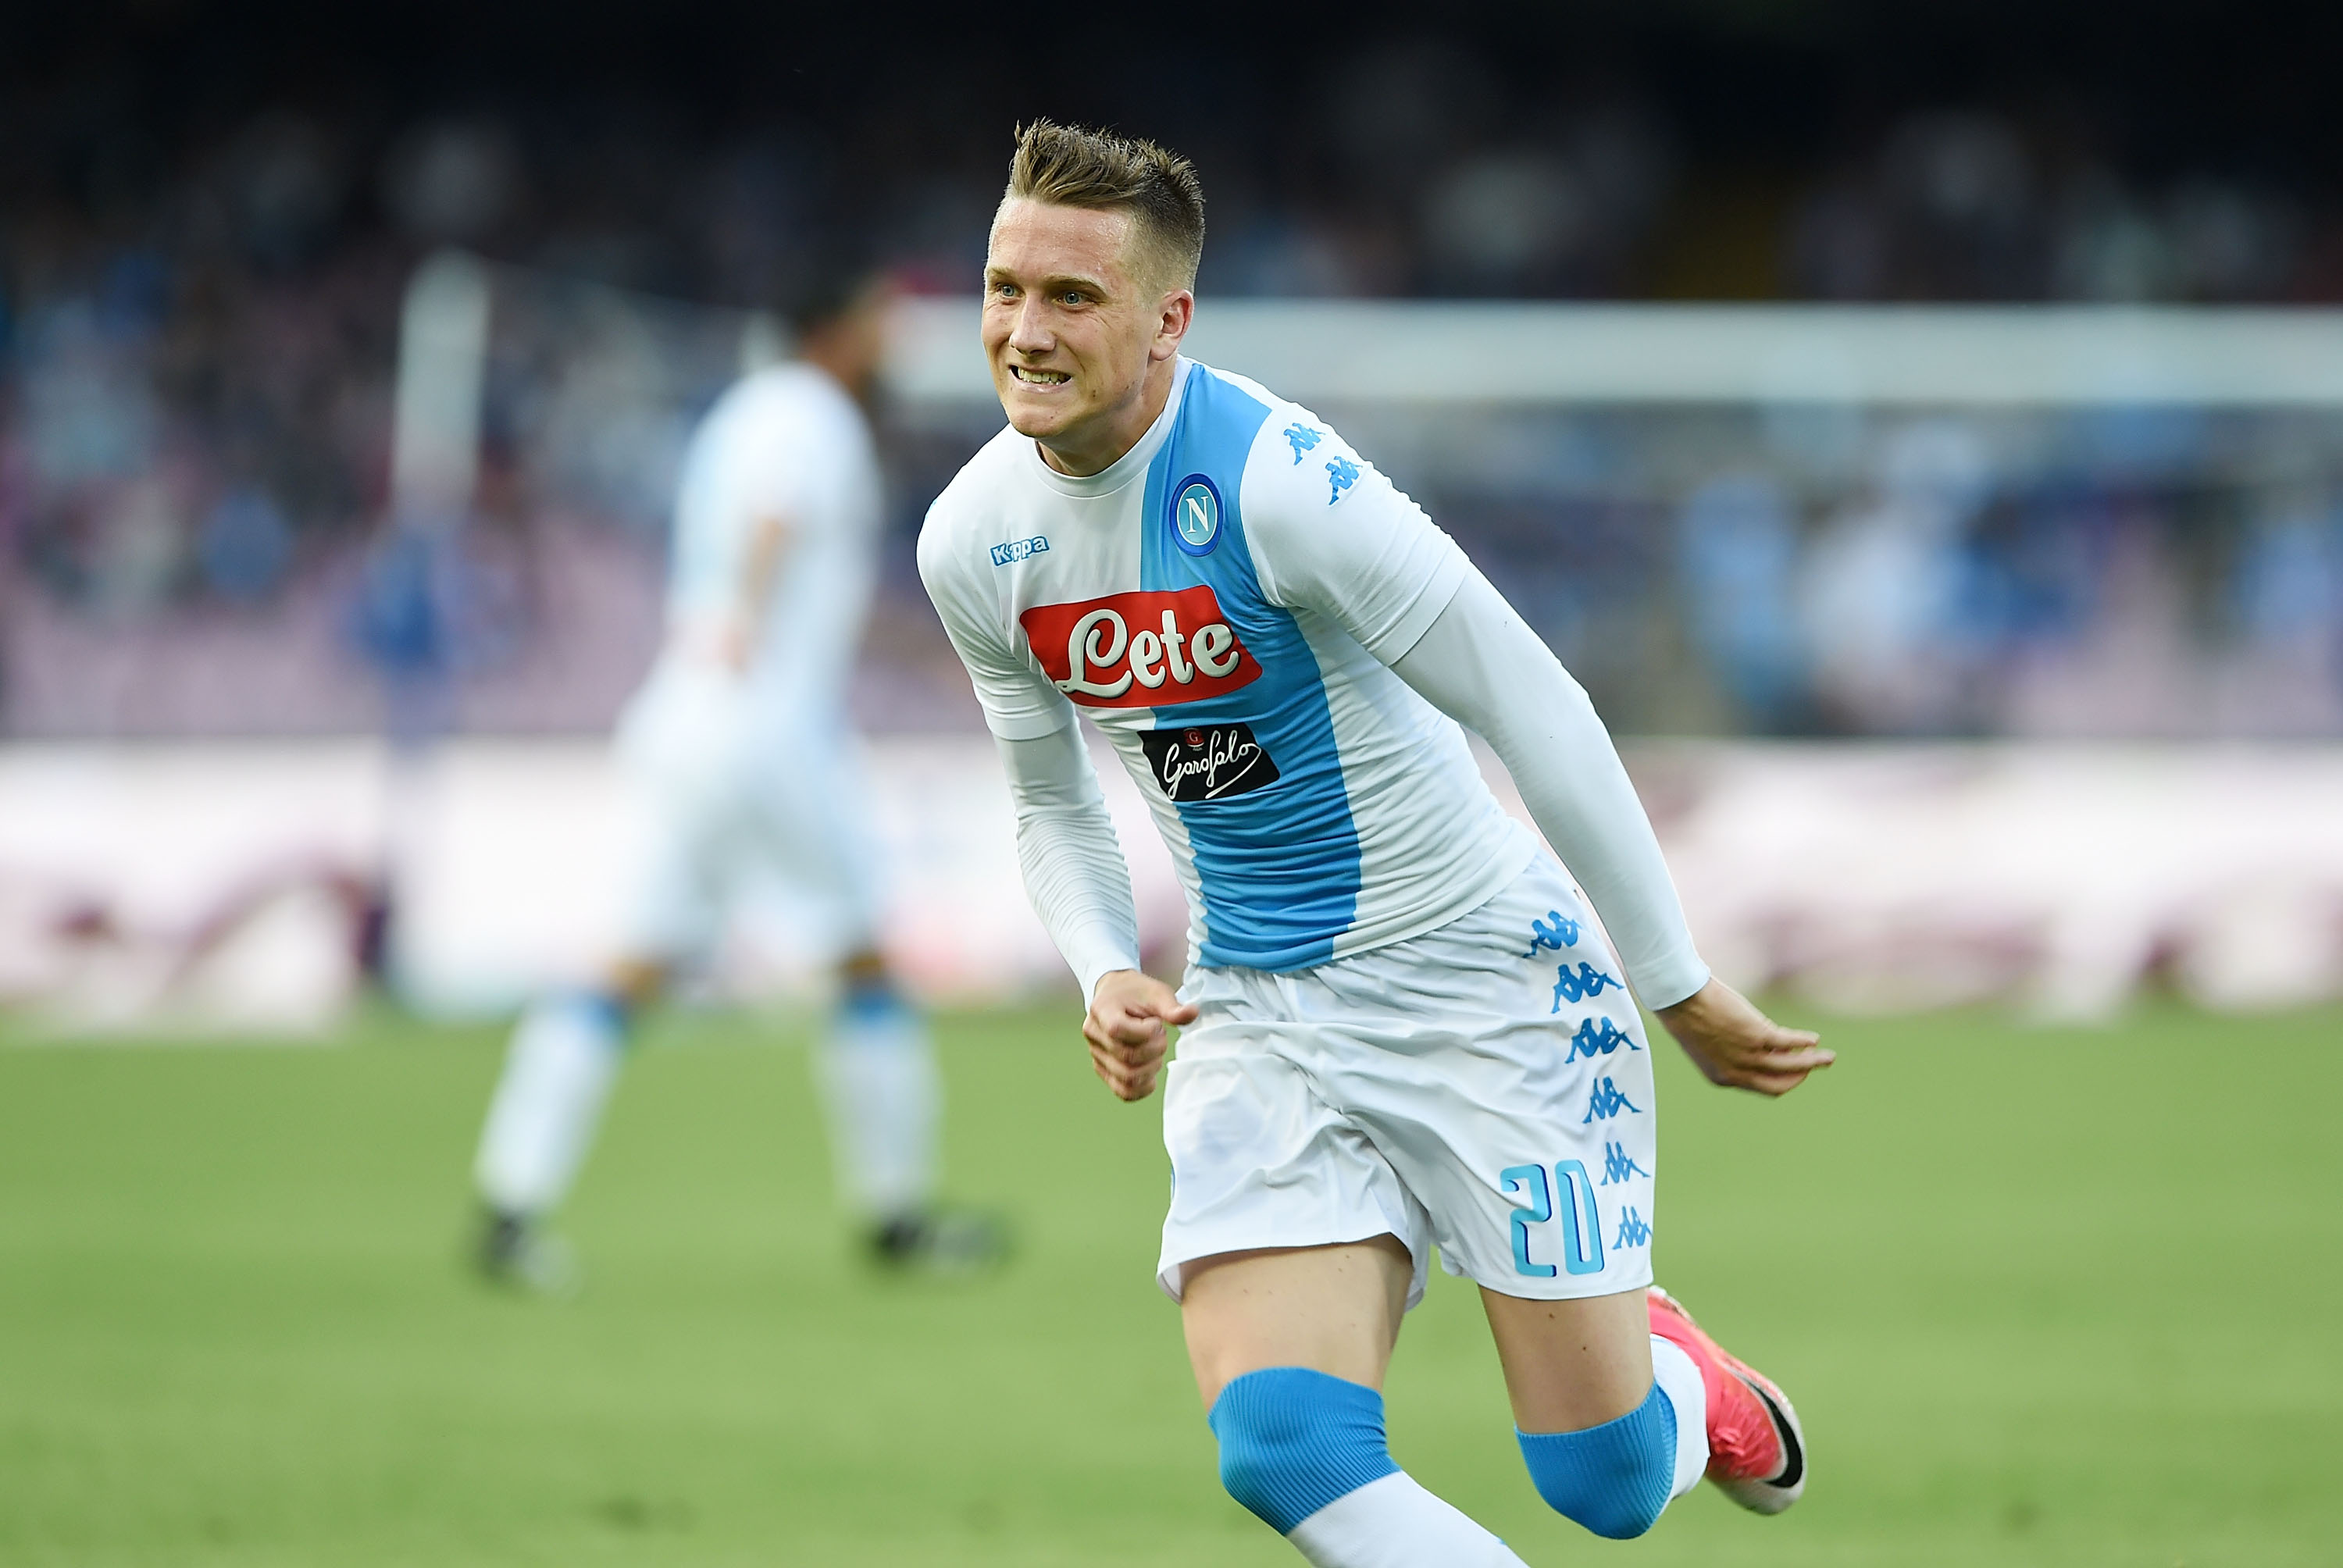 NAPLES, ITALY - MAY 06:  Piotr Zielinski during the Serie A match between SSC Napoli and Cagliari Calcio at Stadio San Paolo on May 6, 2017 in Naples, Italy.  (Photo by Francesco Pecoraro/Getty Images)